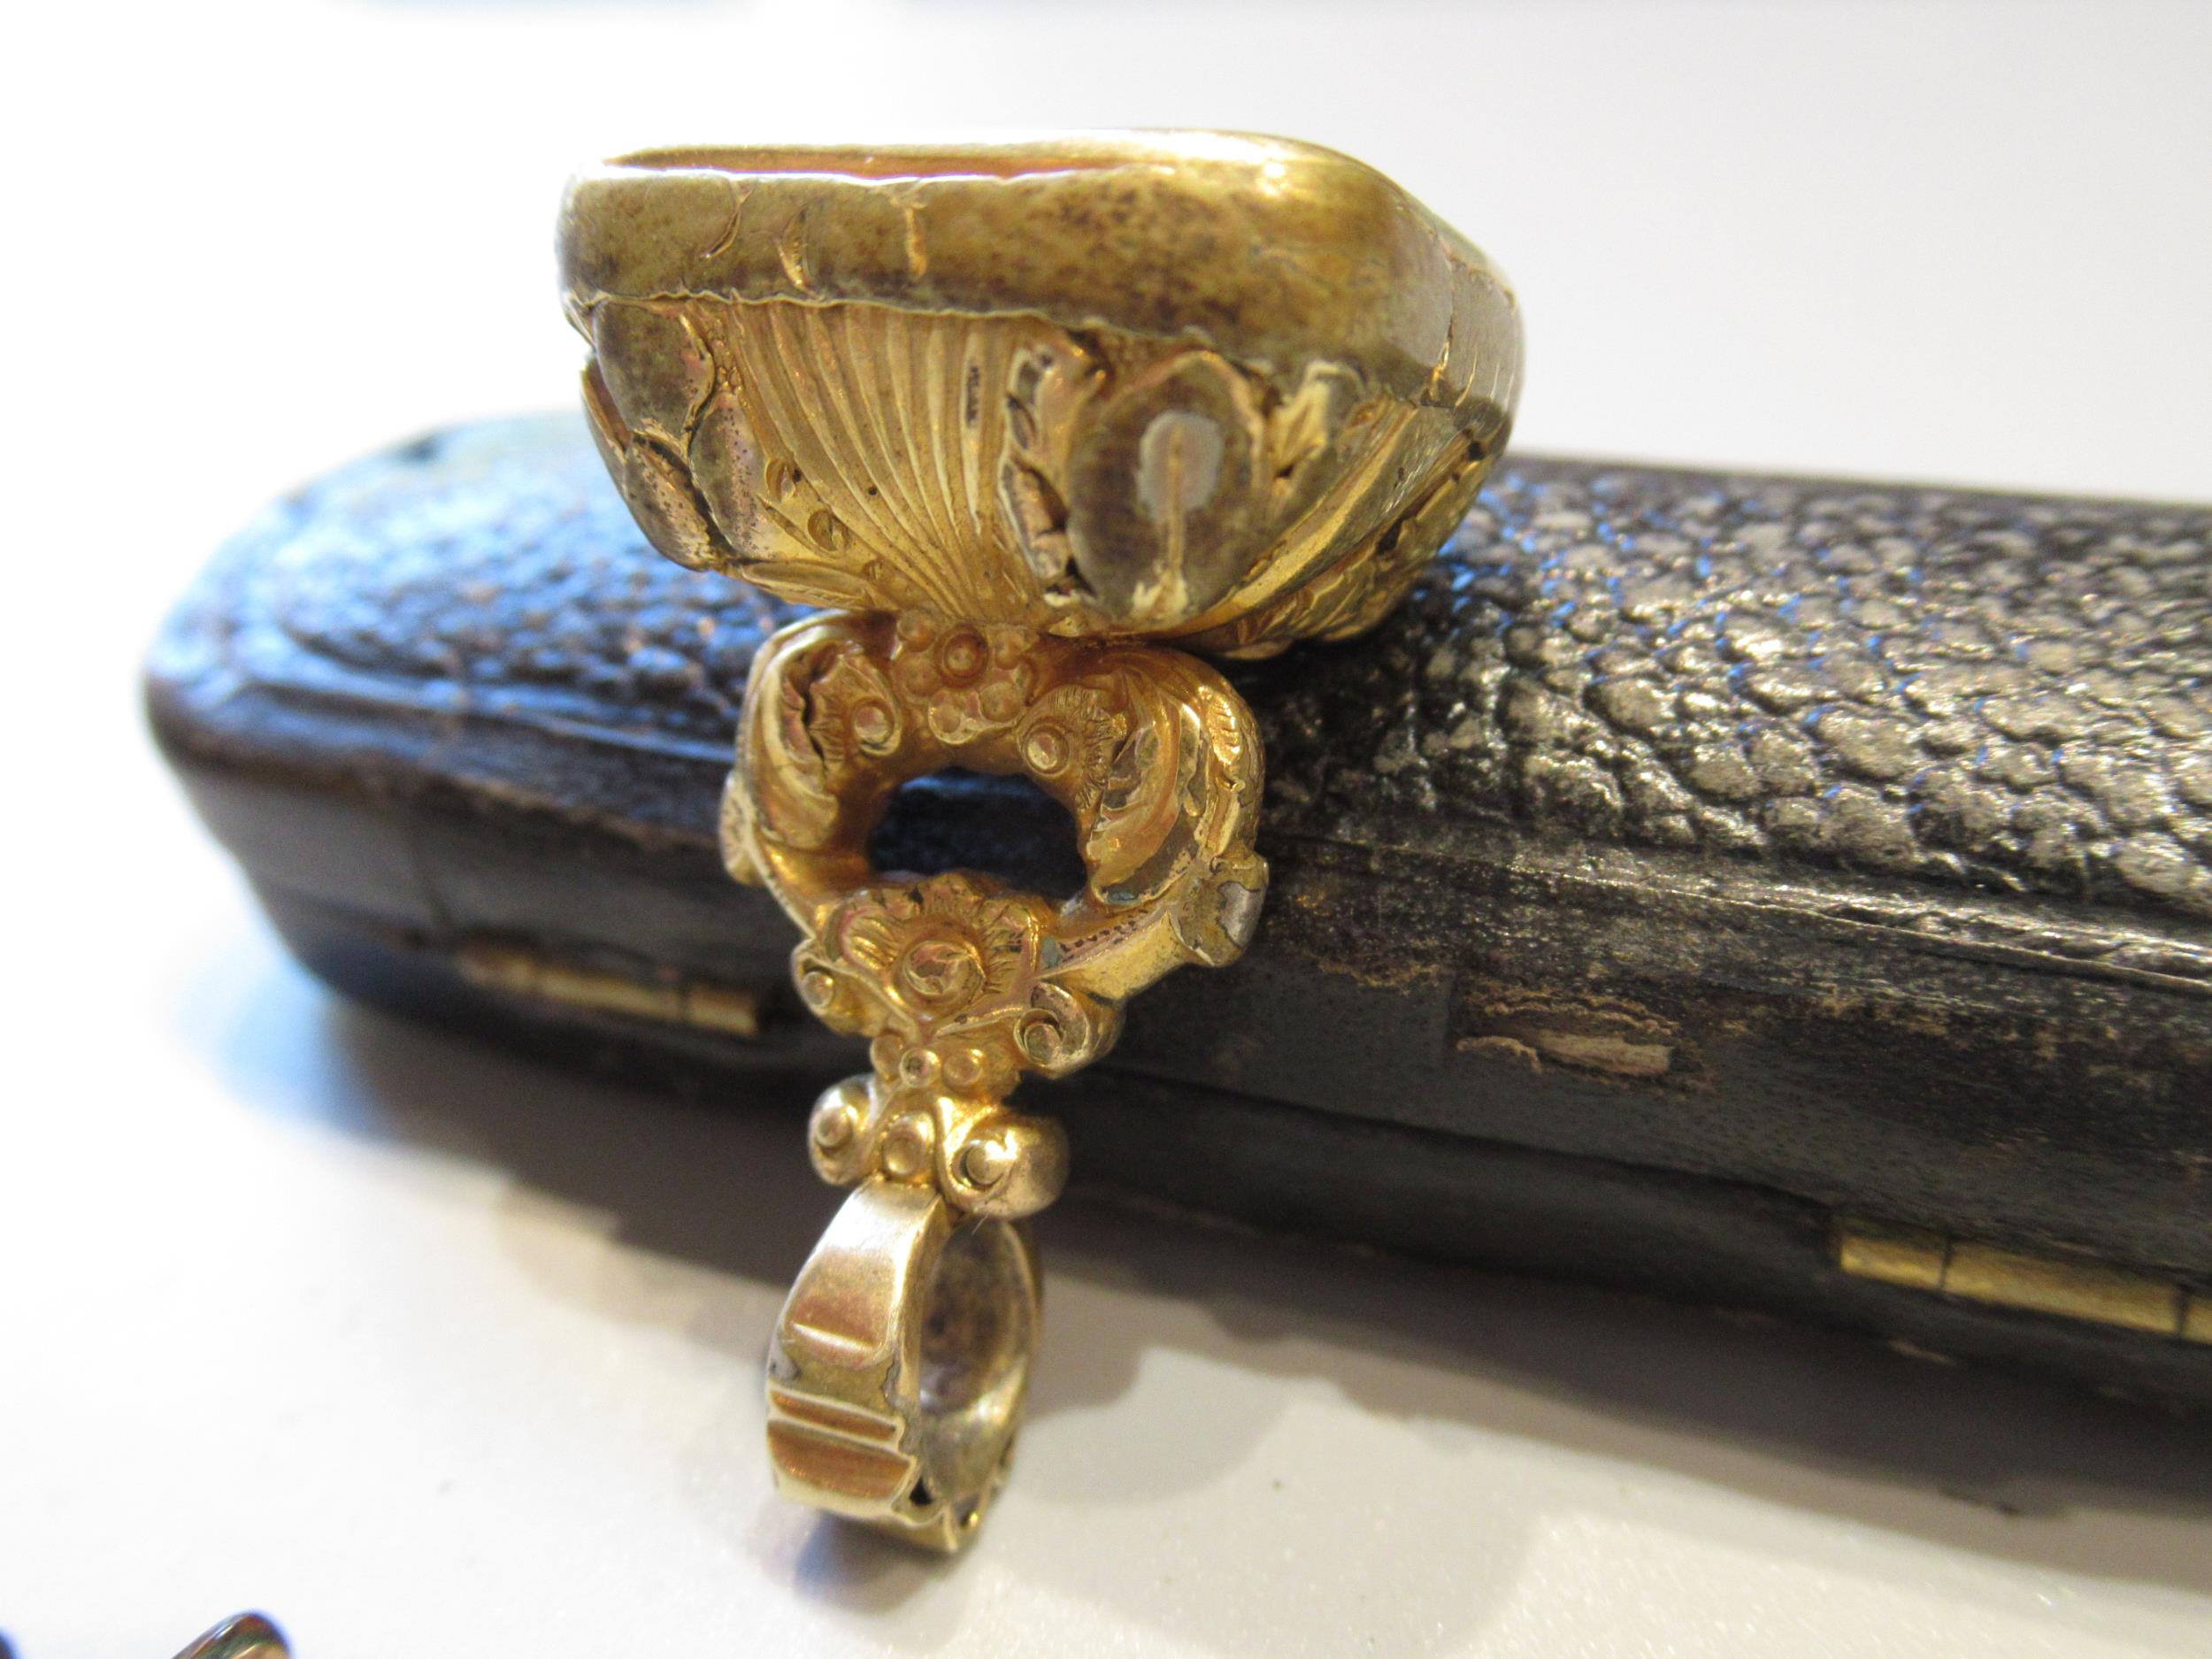 19th Century gilt metal fob seal, gold plated engraved sovereign case, pair of plated spectacles and - Image 3 of 5